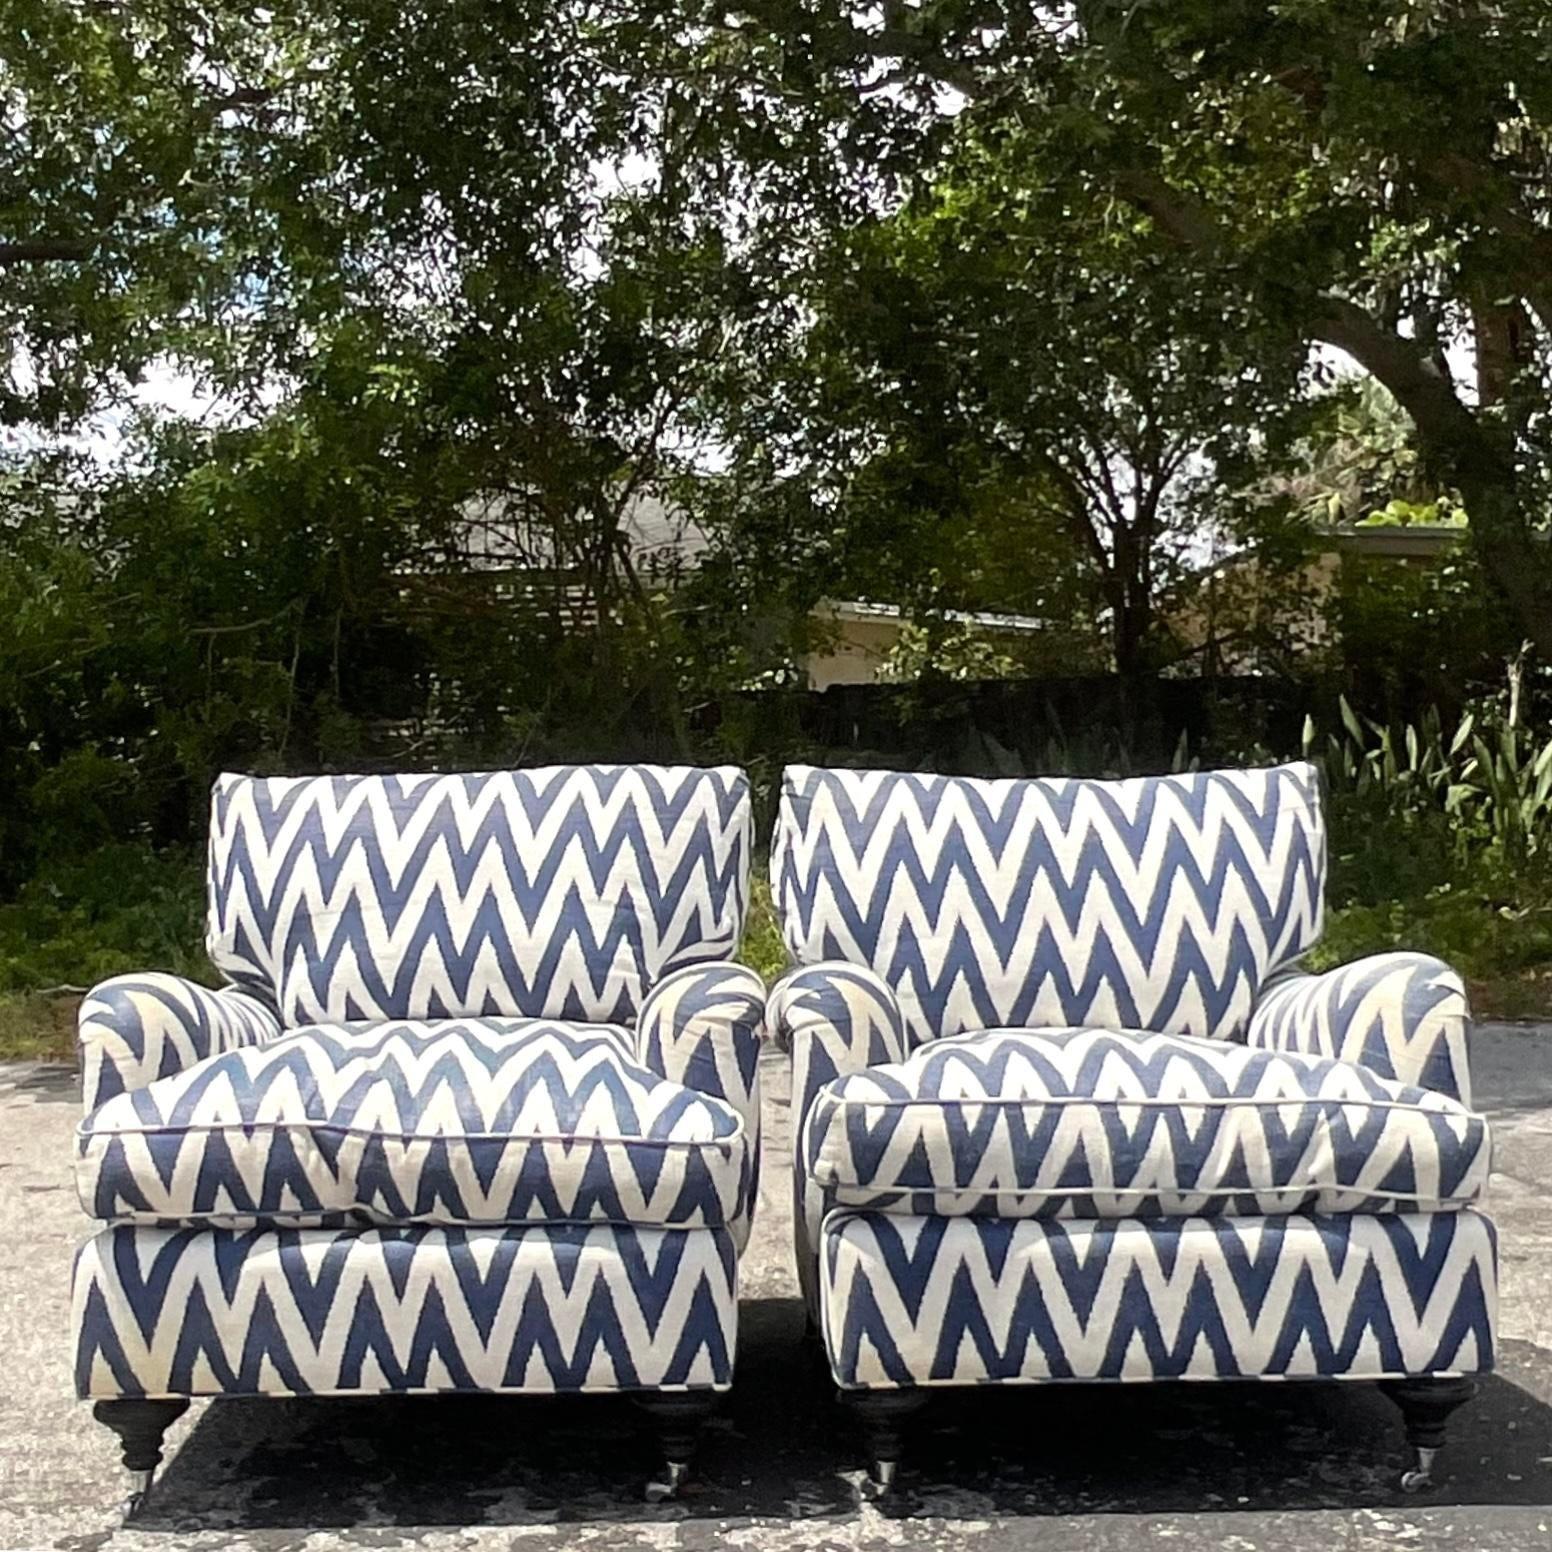 Upholstery Vintage Regency Avery Boardman English Roll Arm Lounge Chairs - a Pair